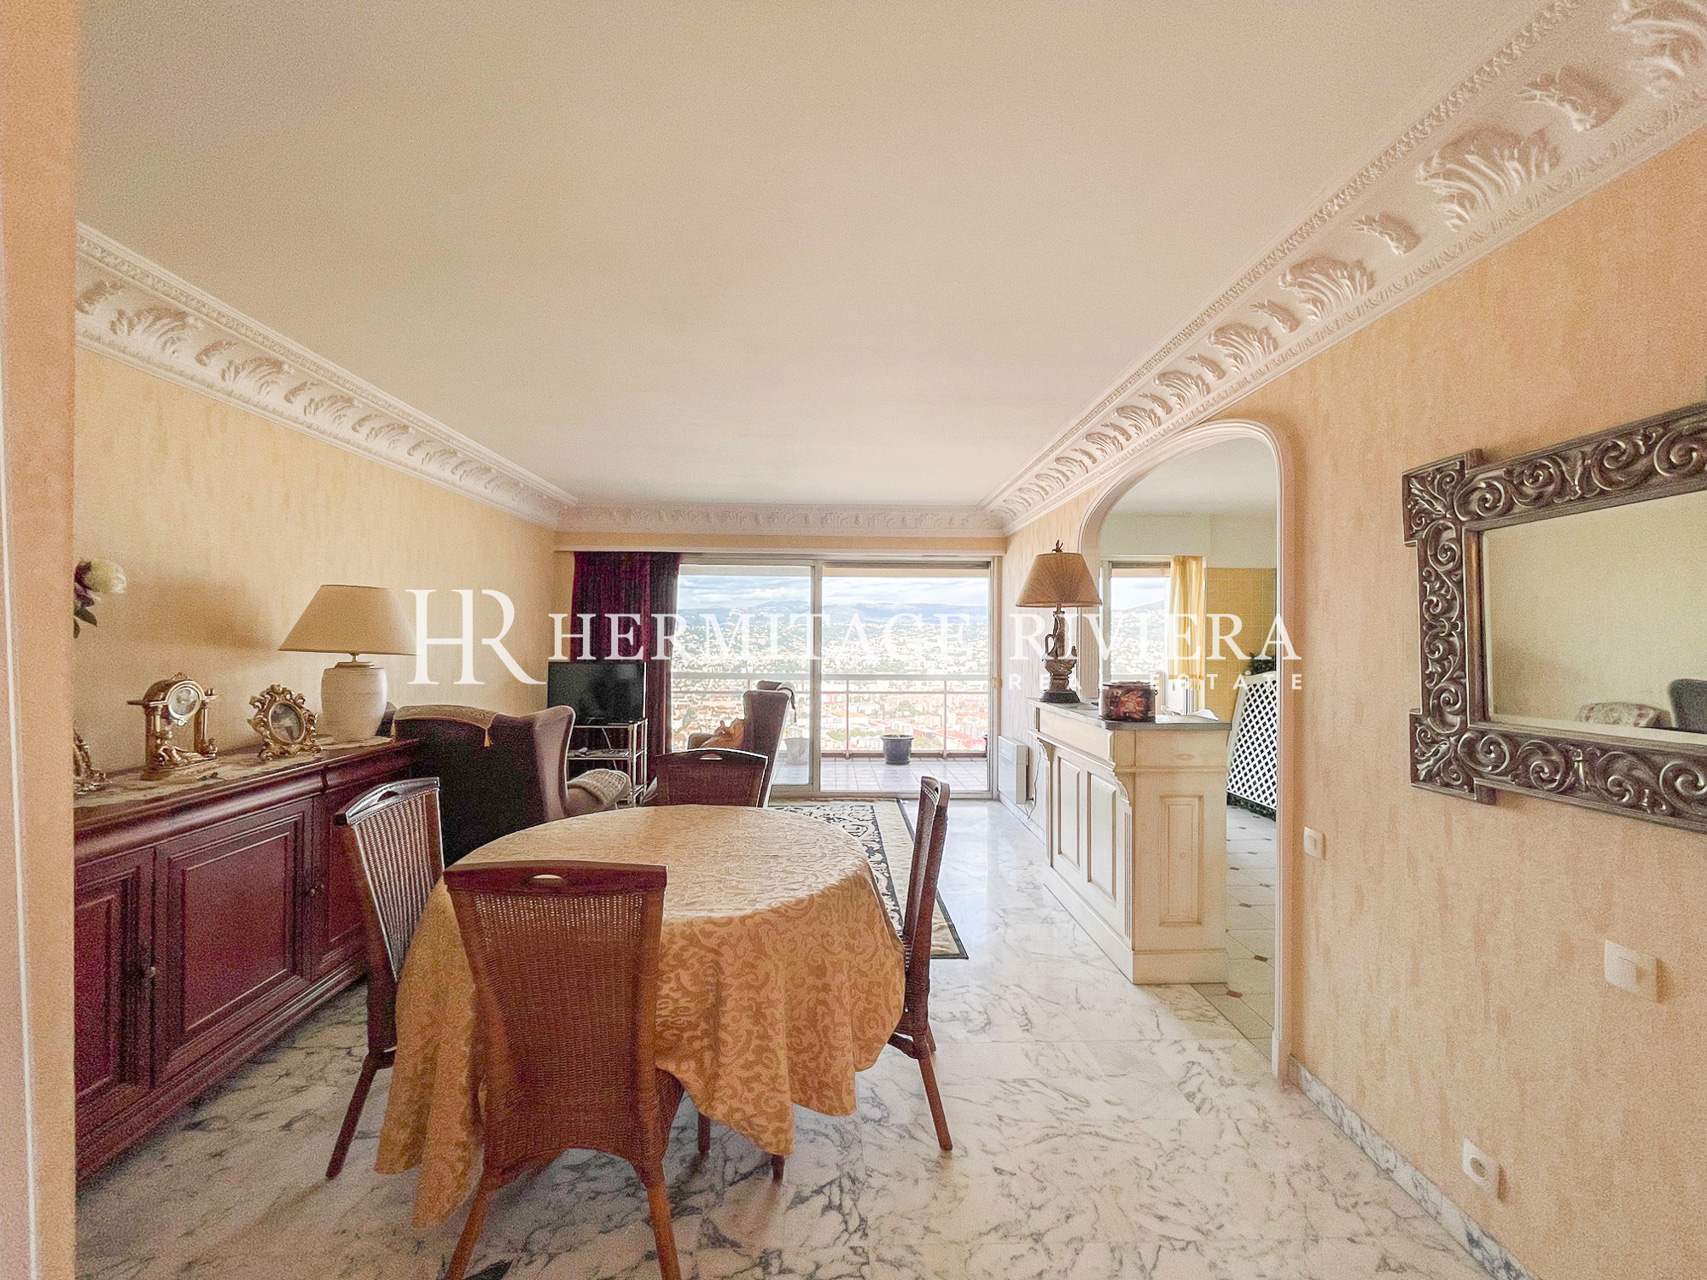 Top floor two bedroom apartment with views over Nice and the sea (image 8)